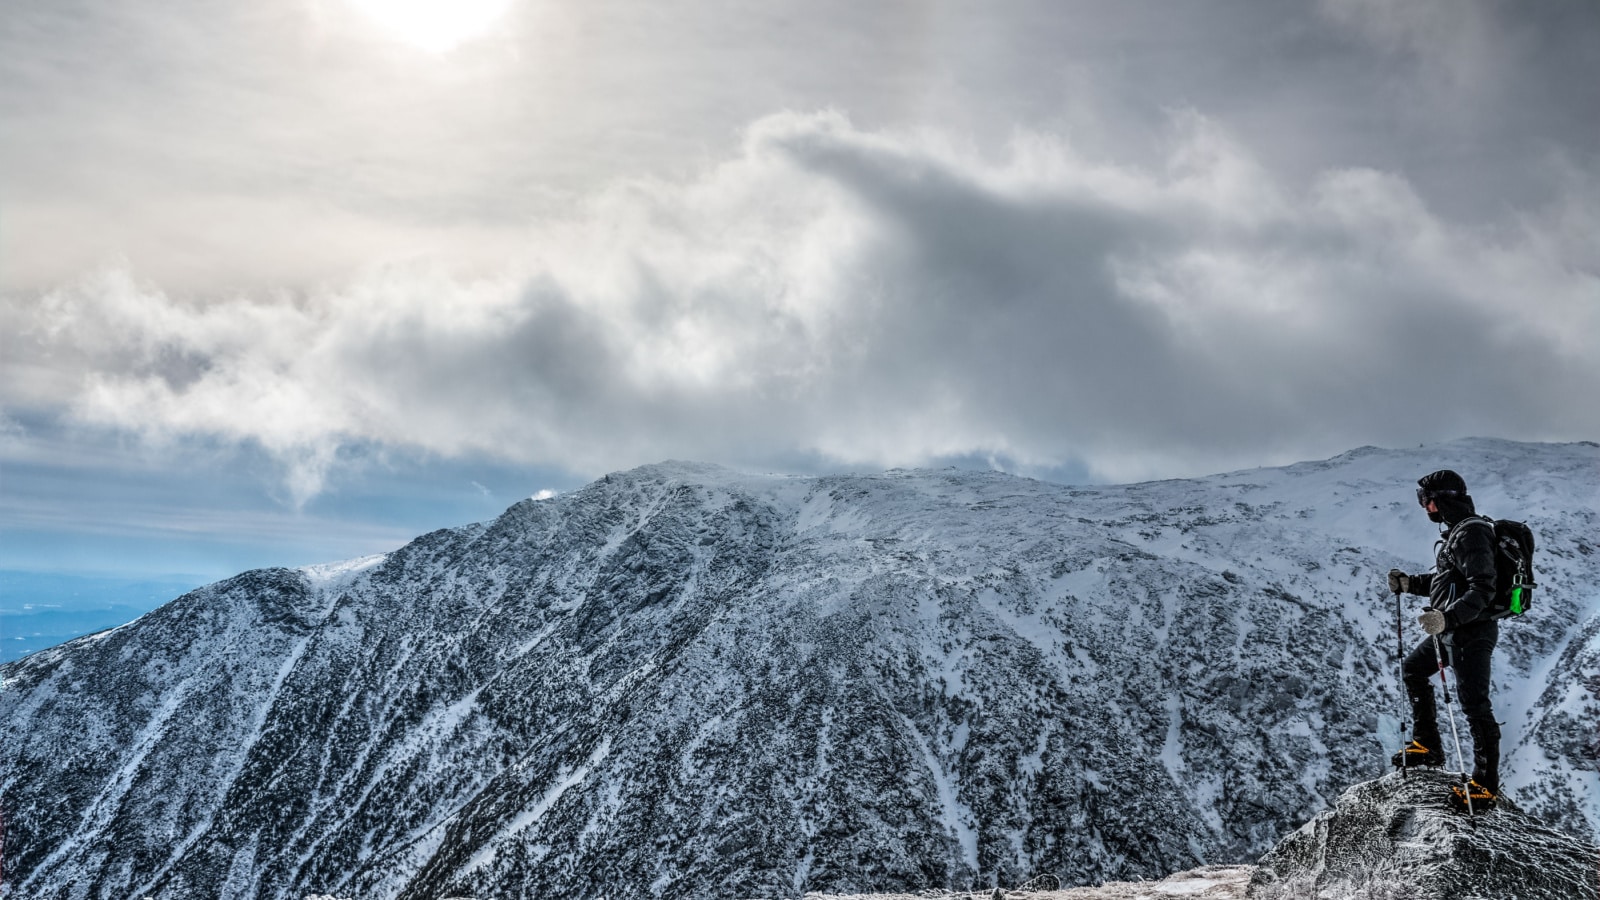 Man with equipement on the edge, hiking mount Washington in winter, looking over the ravine. New Hampshire, USA